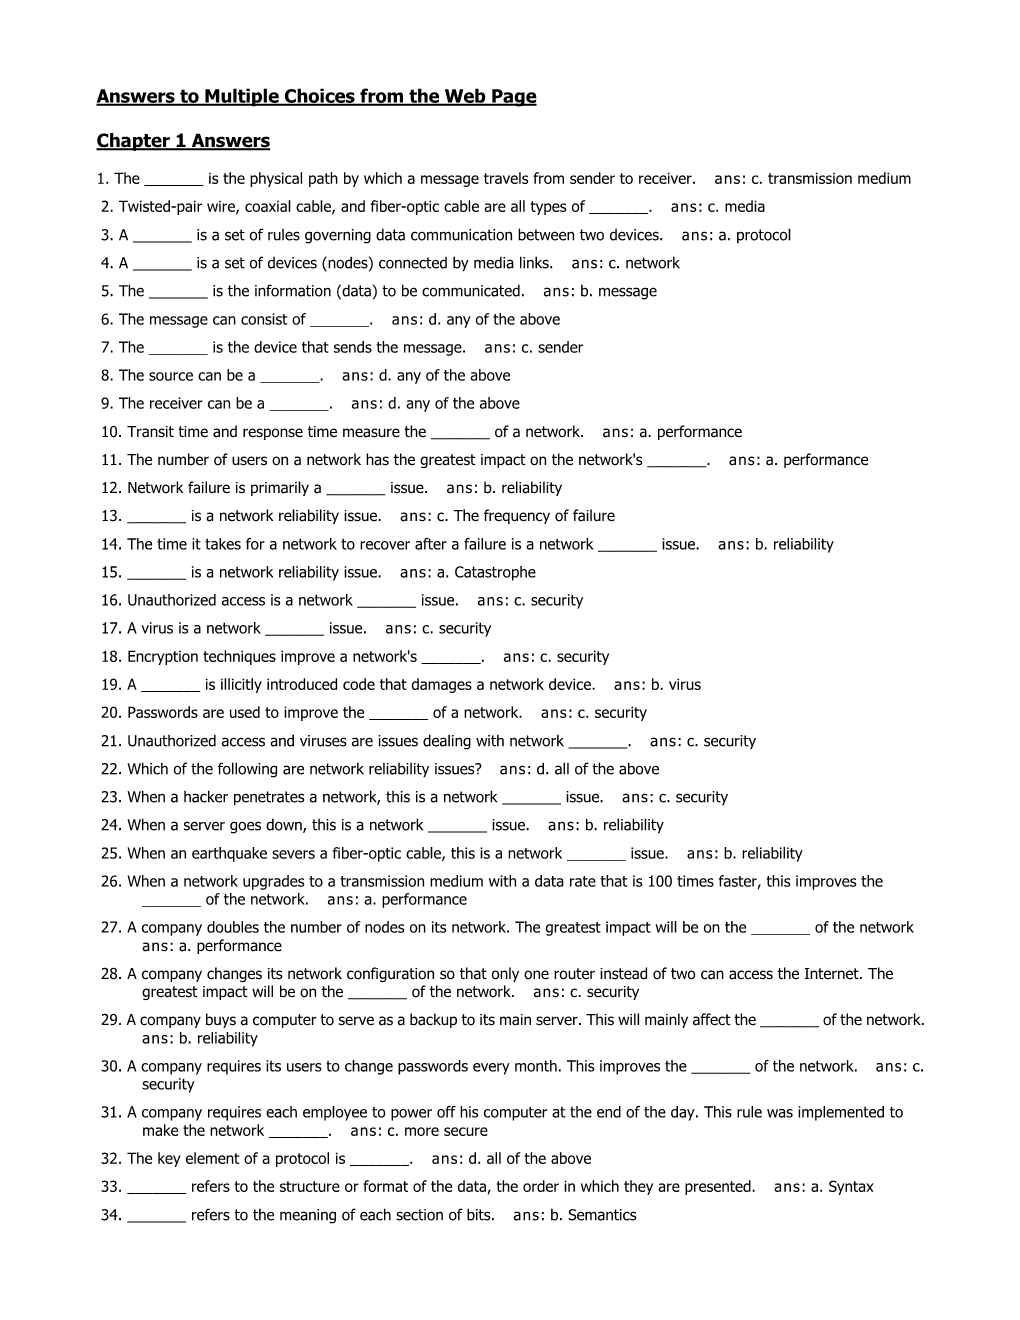 Answers to Multiple Choices from the Web Page Chapter 1 Answers